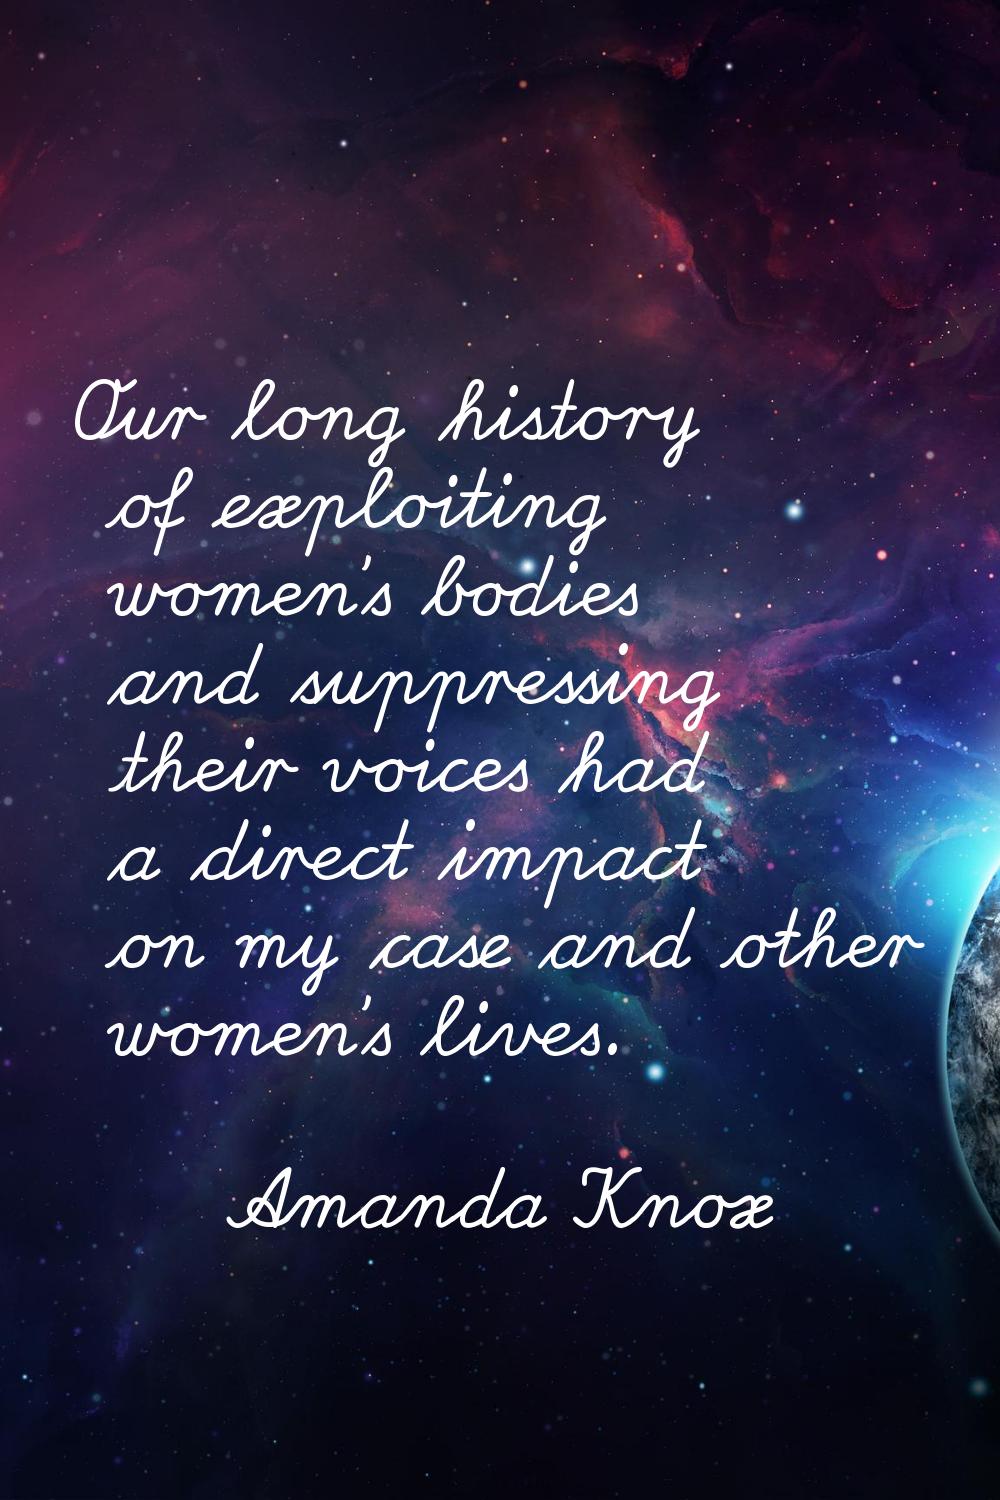 Our long history of exploiting women's bodies and suppressing their voices had a direct impact on m